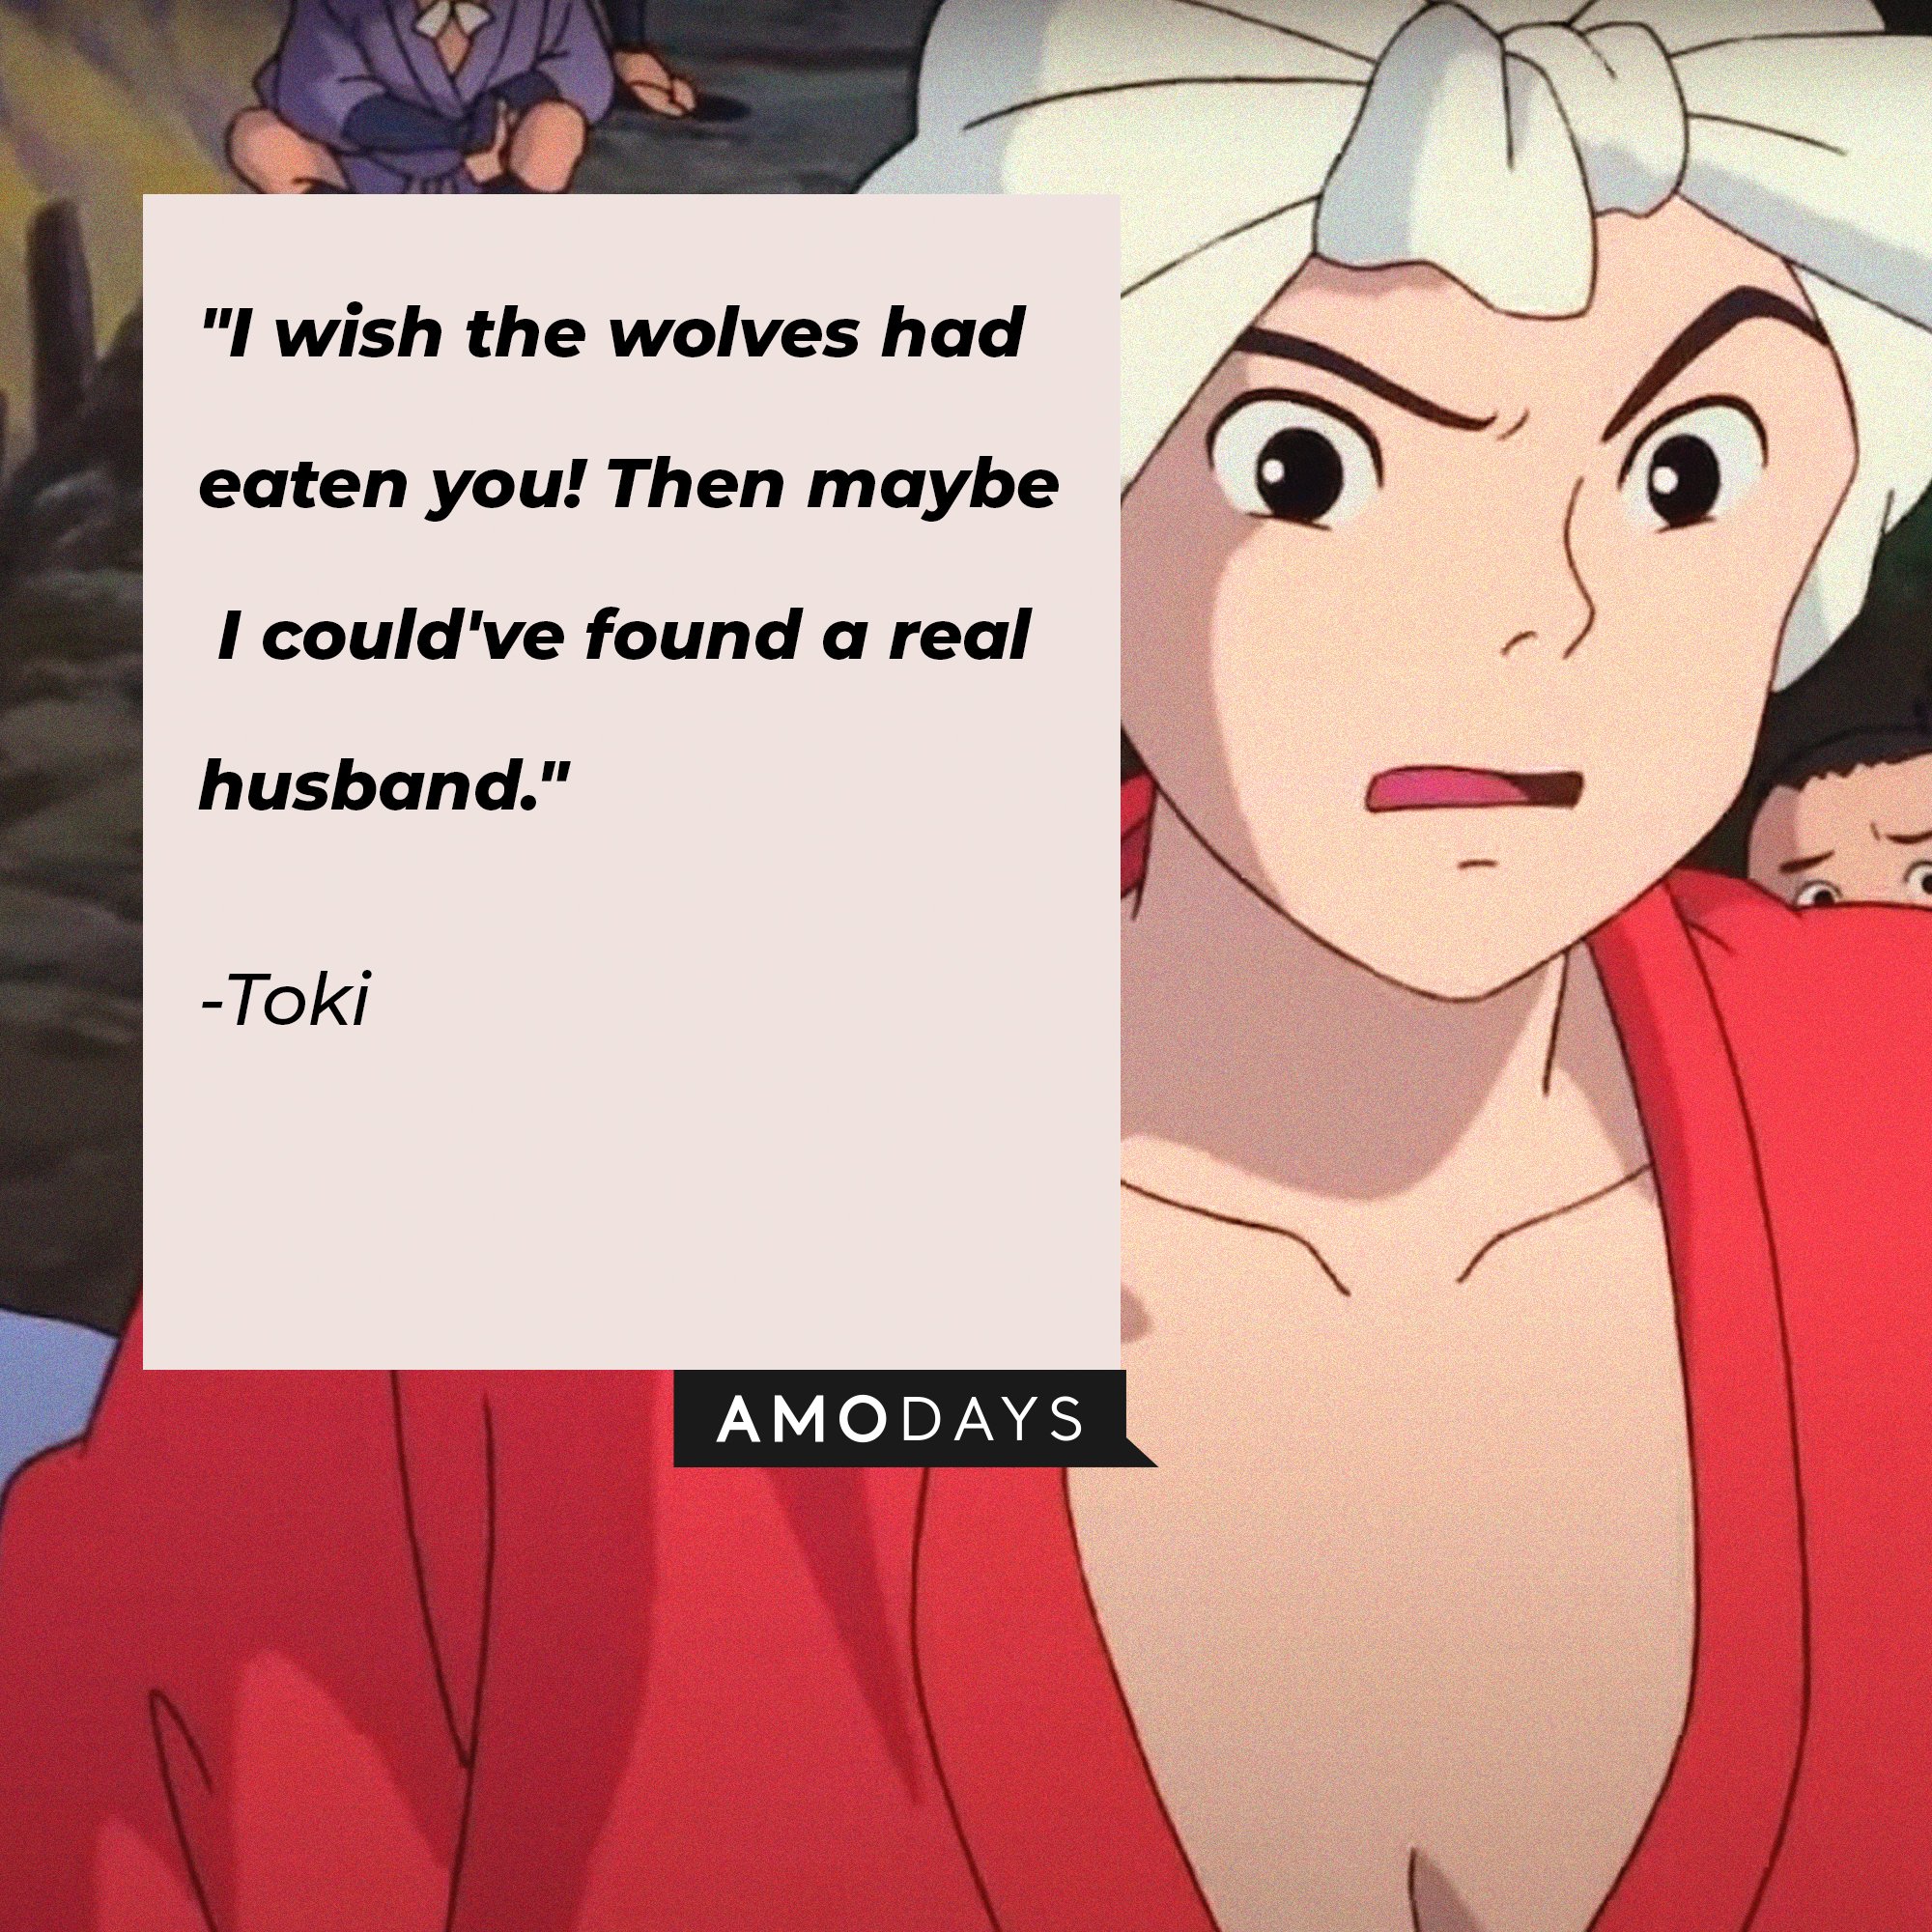 Toki’s quote: "I wish the wolves had eaten you! Then maybe I could've found a real husband." | Image: AmoDays